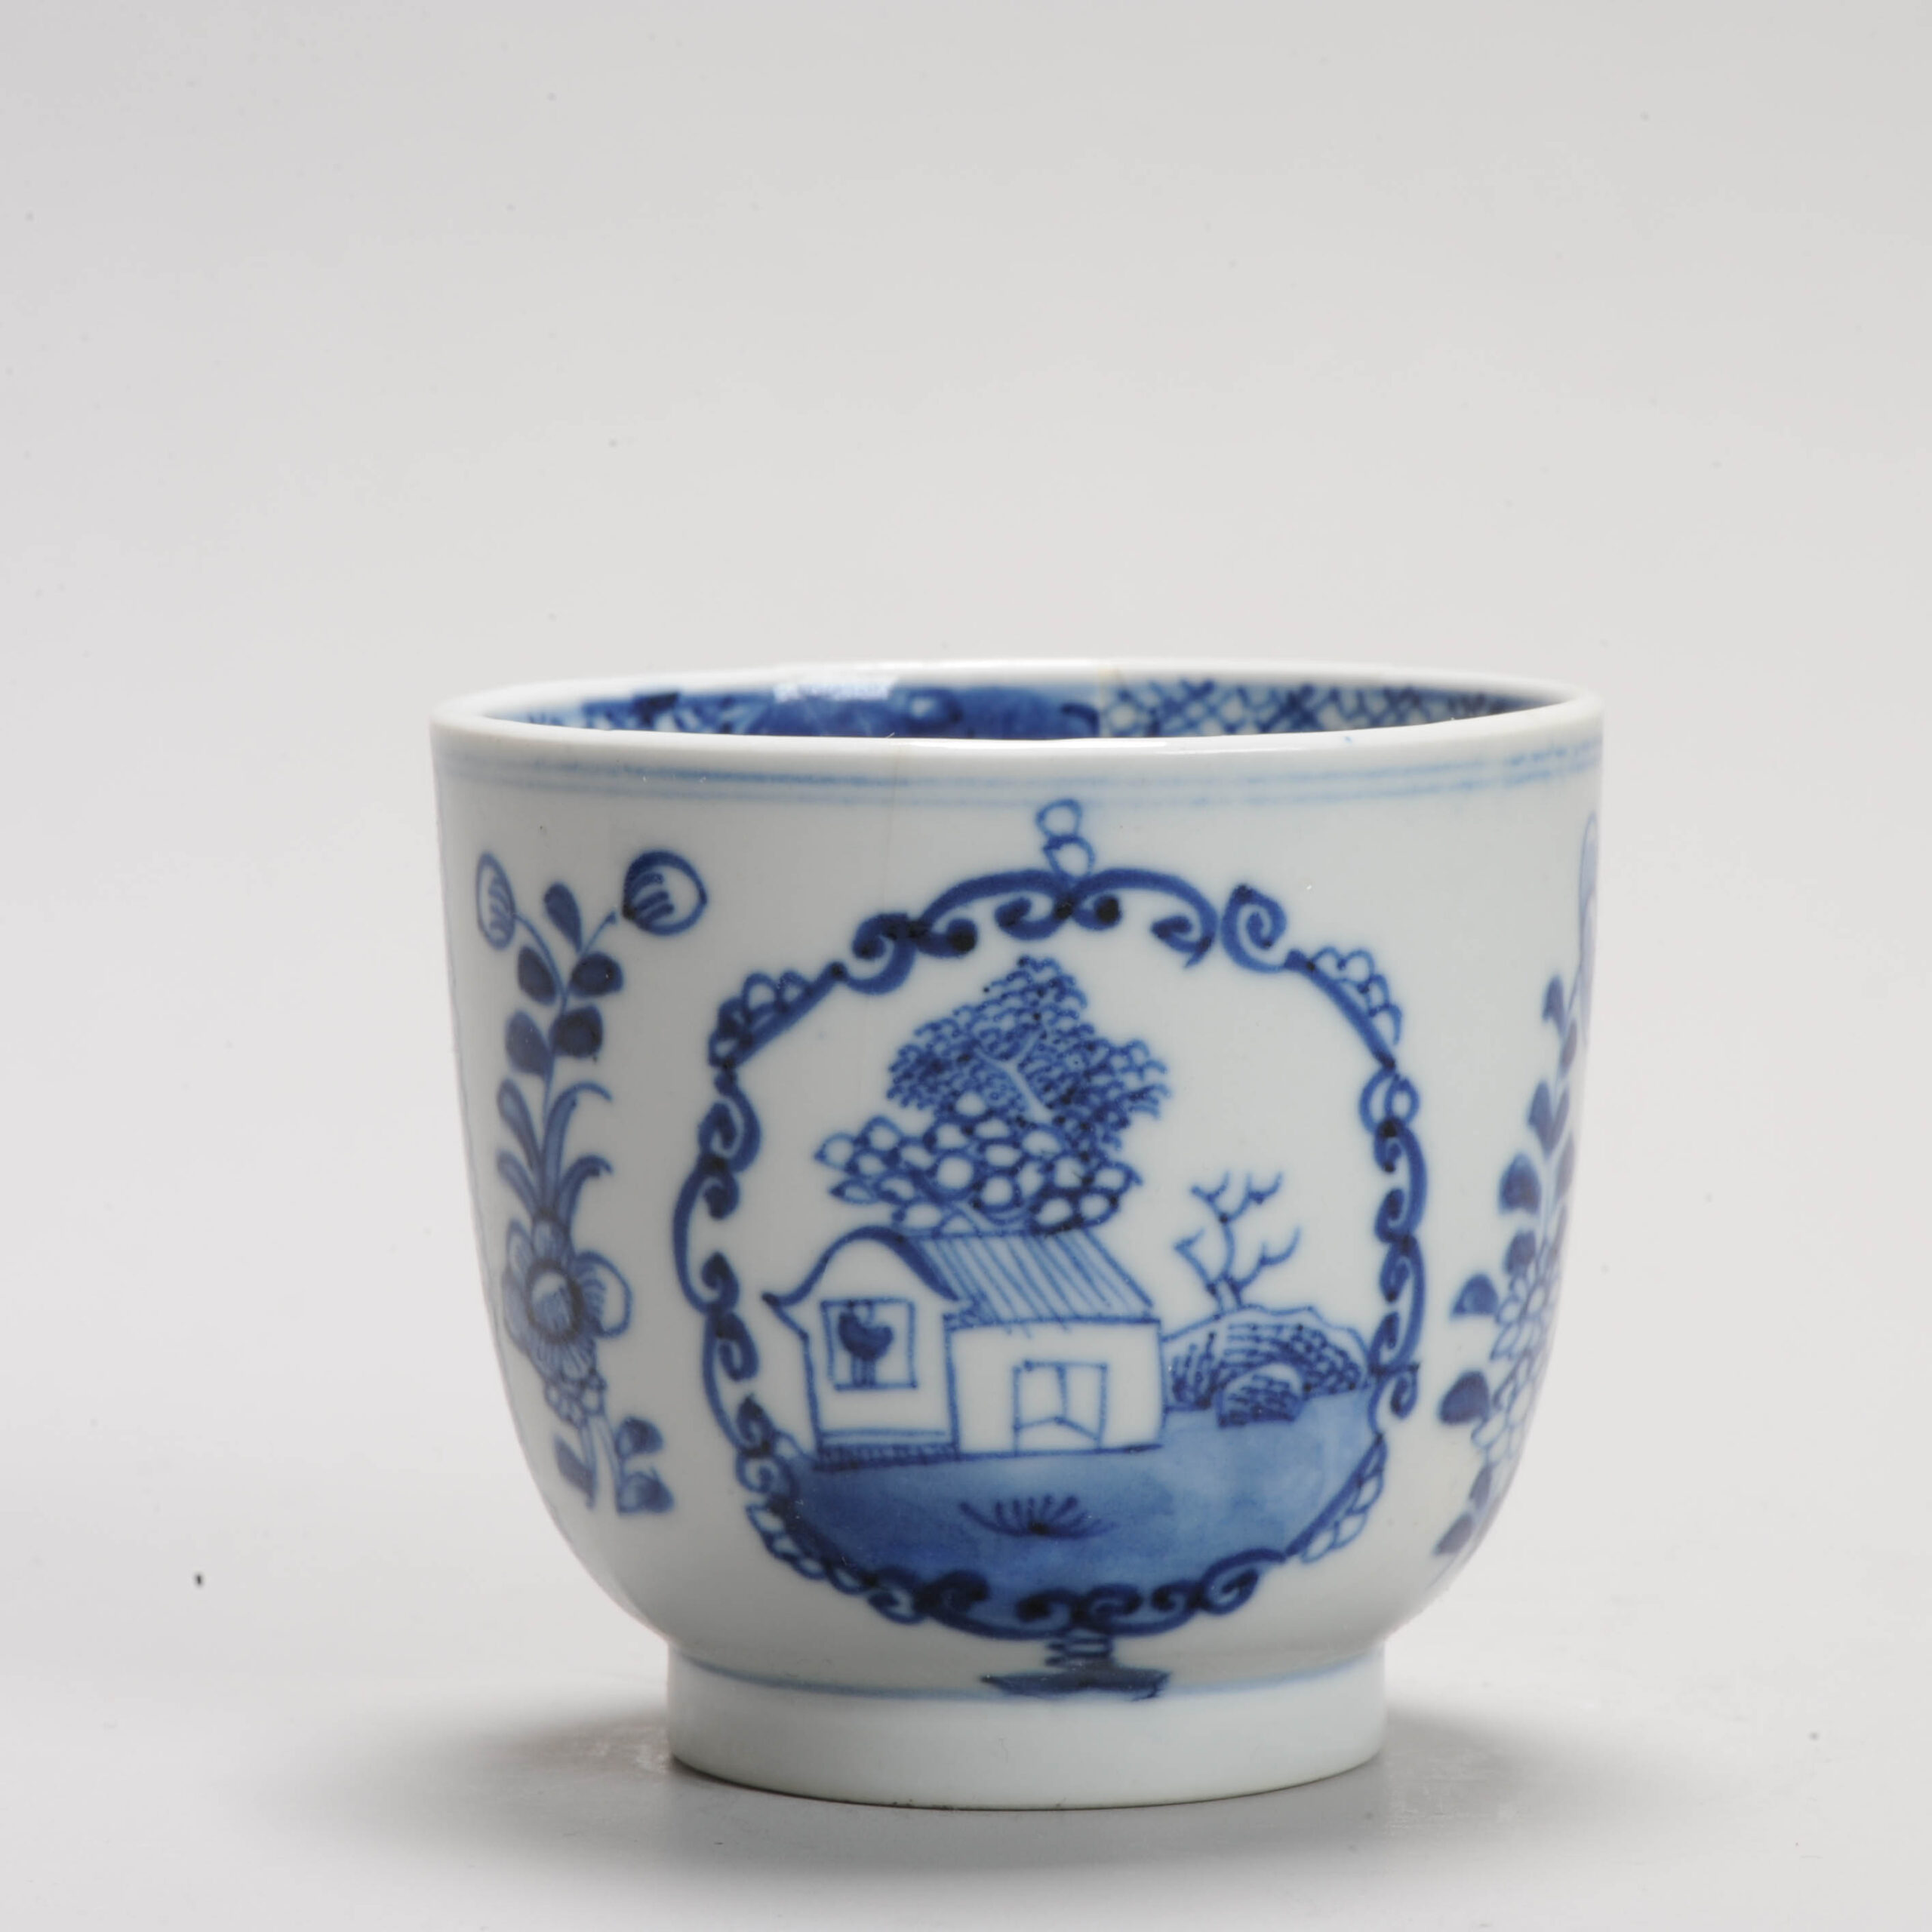 A 18th c Qing period Chinese Porcelain Chocolate cup  China Antique 1730